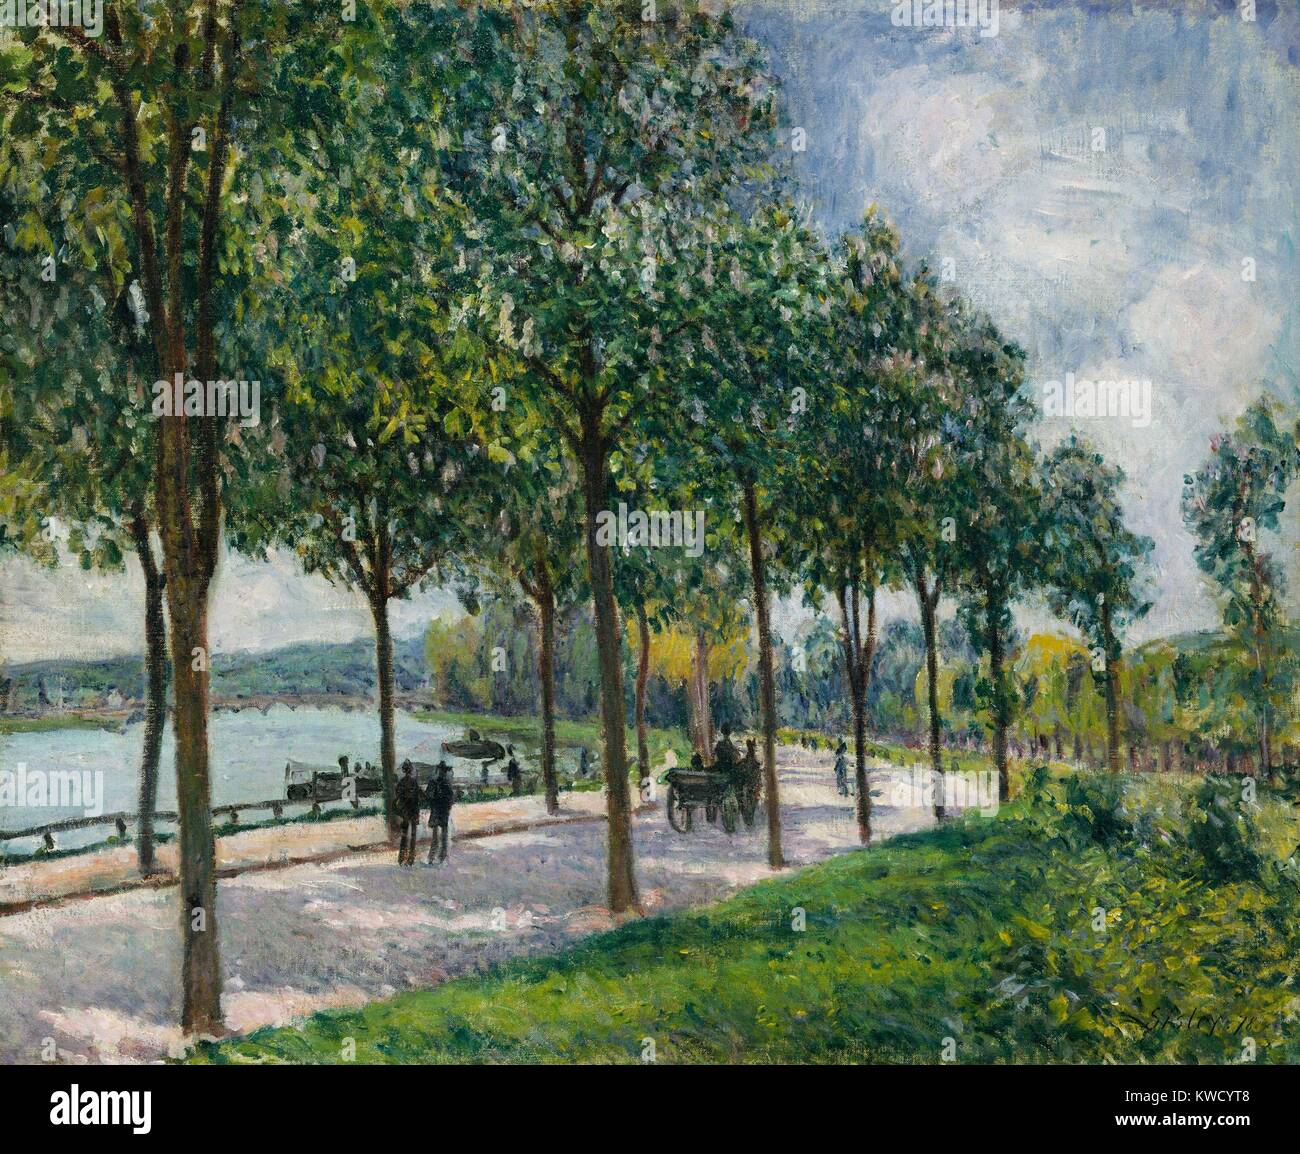 Alley of Chestnut Trees, by Alfred Sisley, 1878, French impressionist painting, oil on canvas. In Sevres, Sisley painted this view of a curved roadway along the Seine River lined with chestnut trees (BSLOC 2017 3 128) Stock Photo